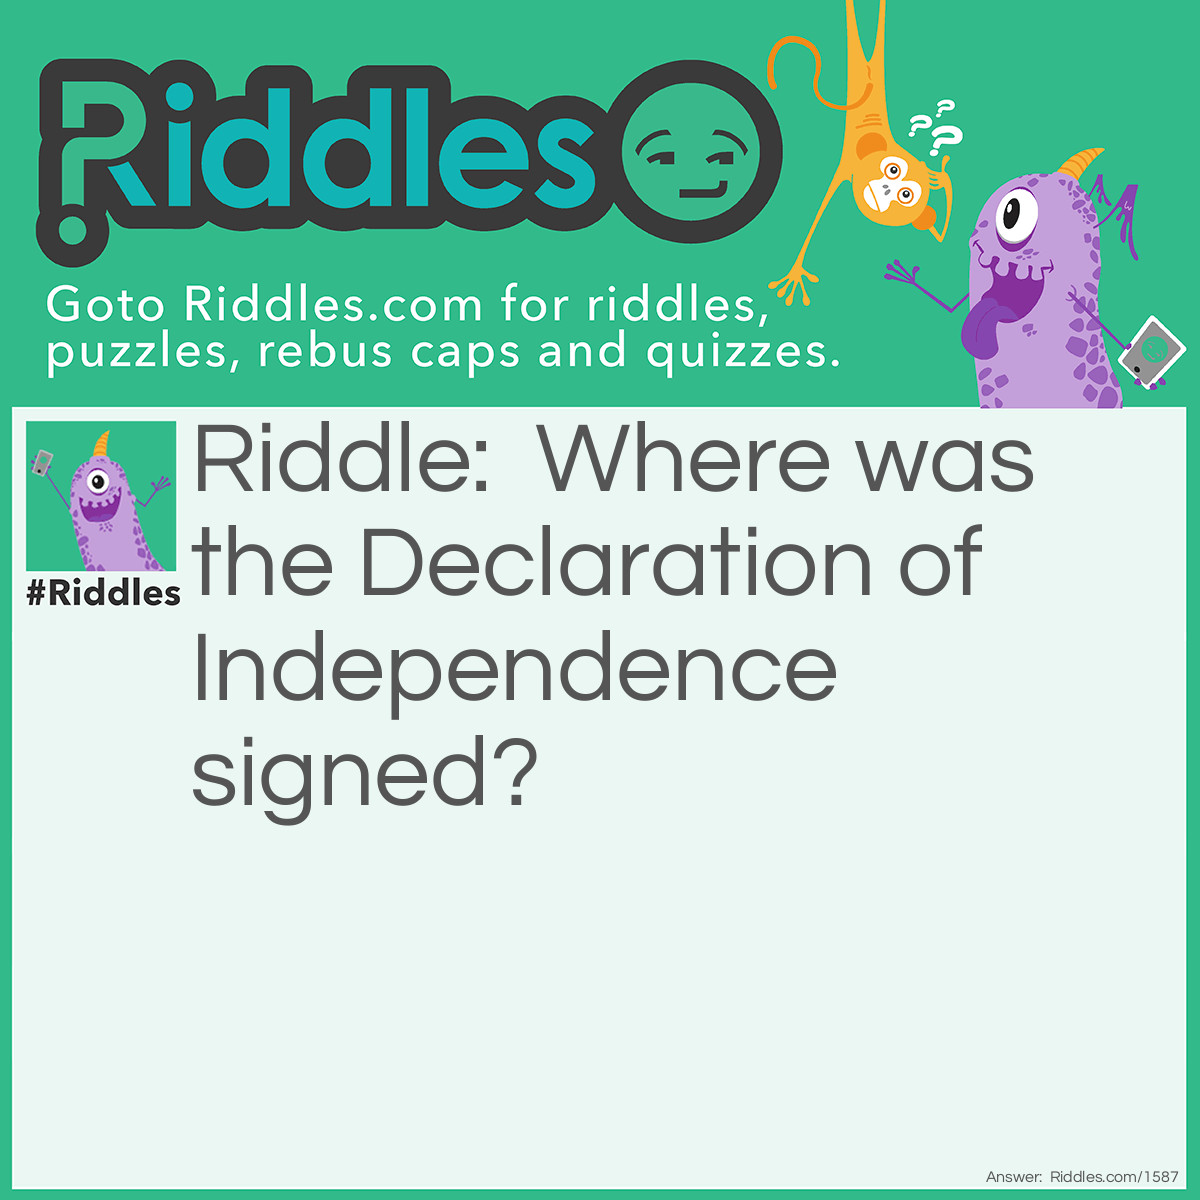 Riddle: Where was the Declaration of Independence signed? Answer: At the bottom.